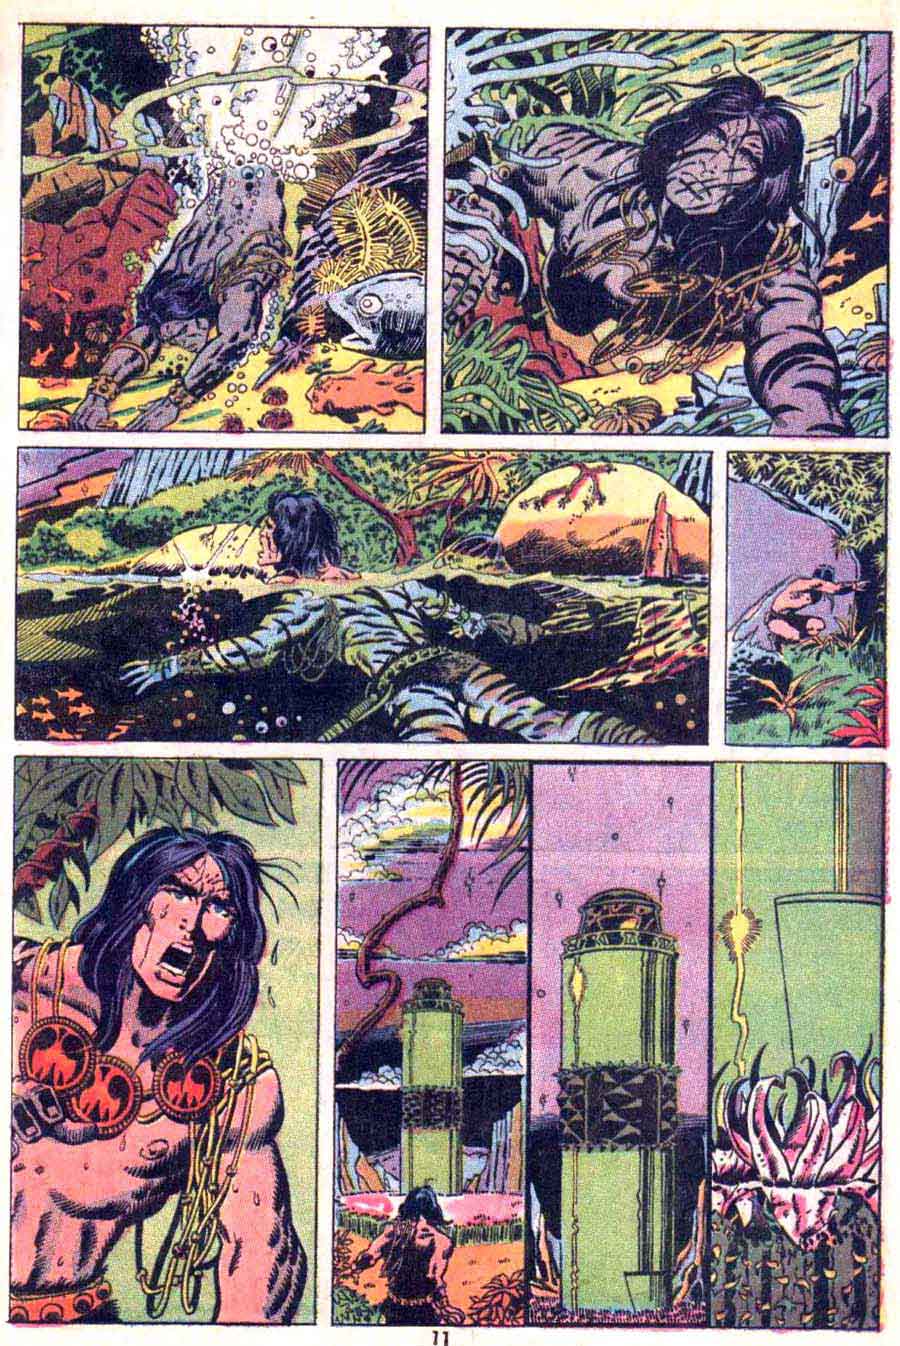 Conan the Barbarian v1 #9 marvel comic book page art by Barry Windsor Smith